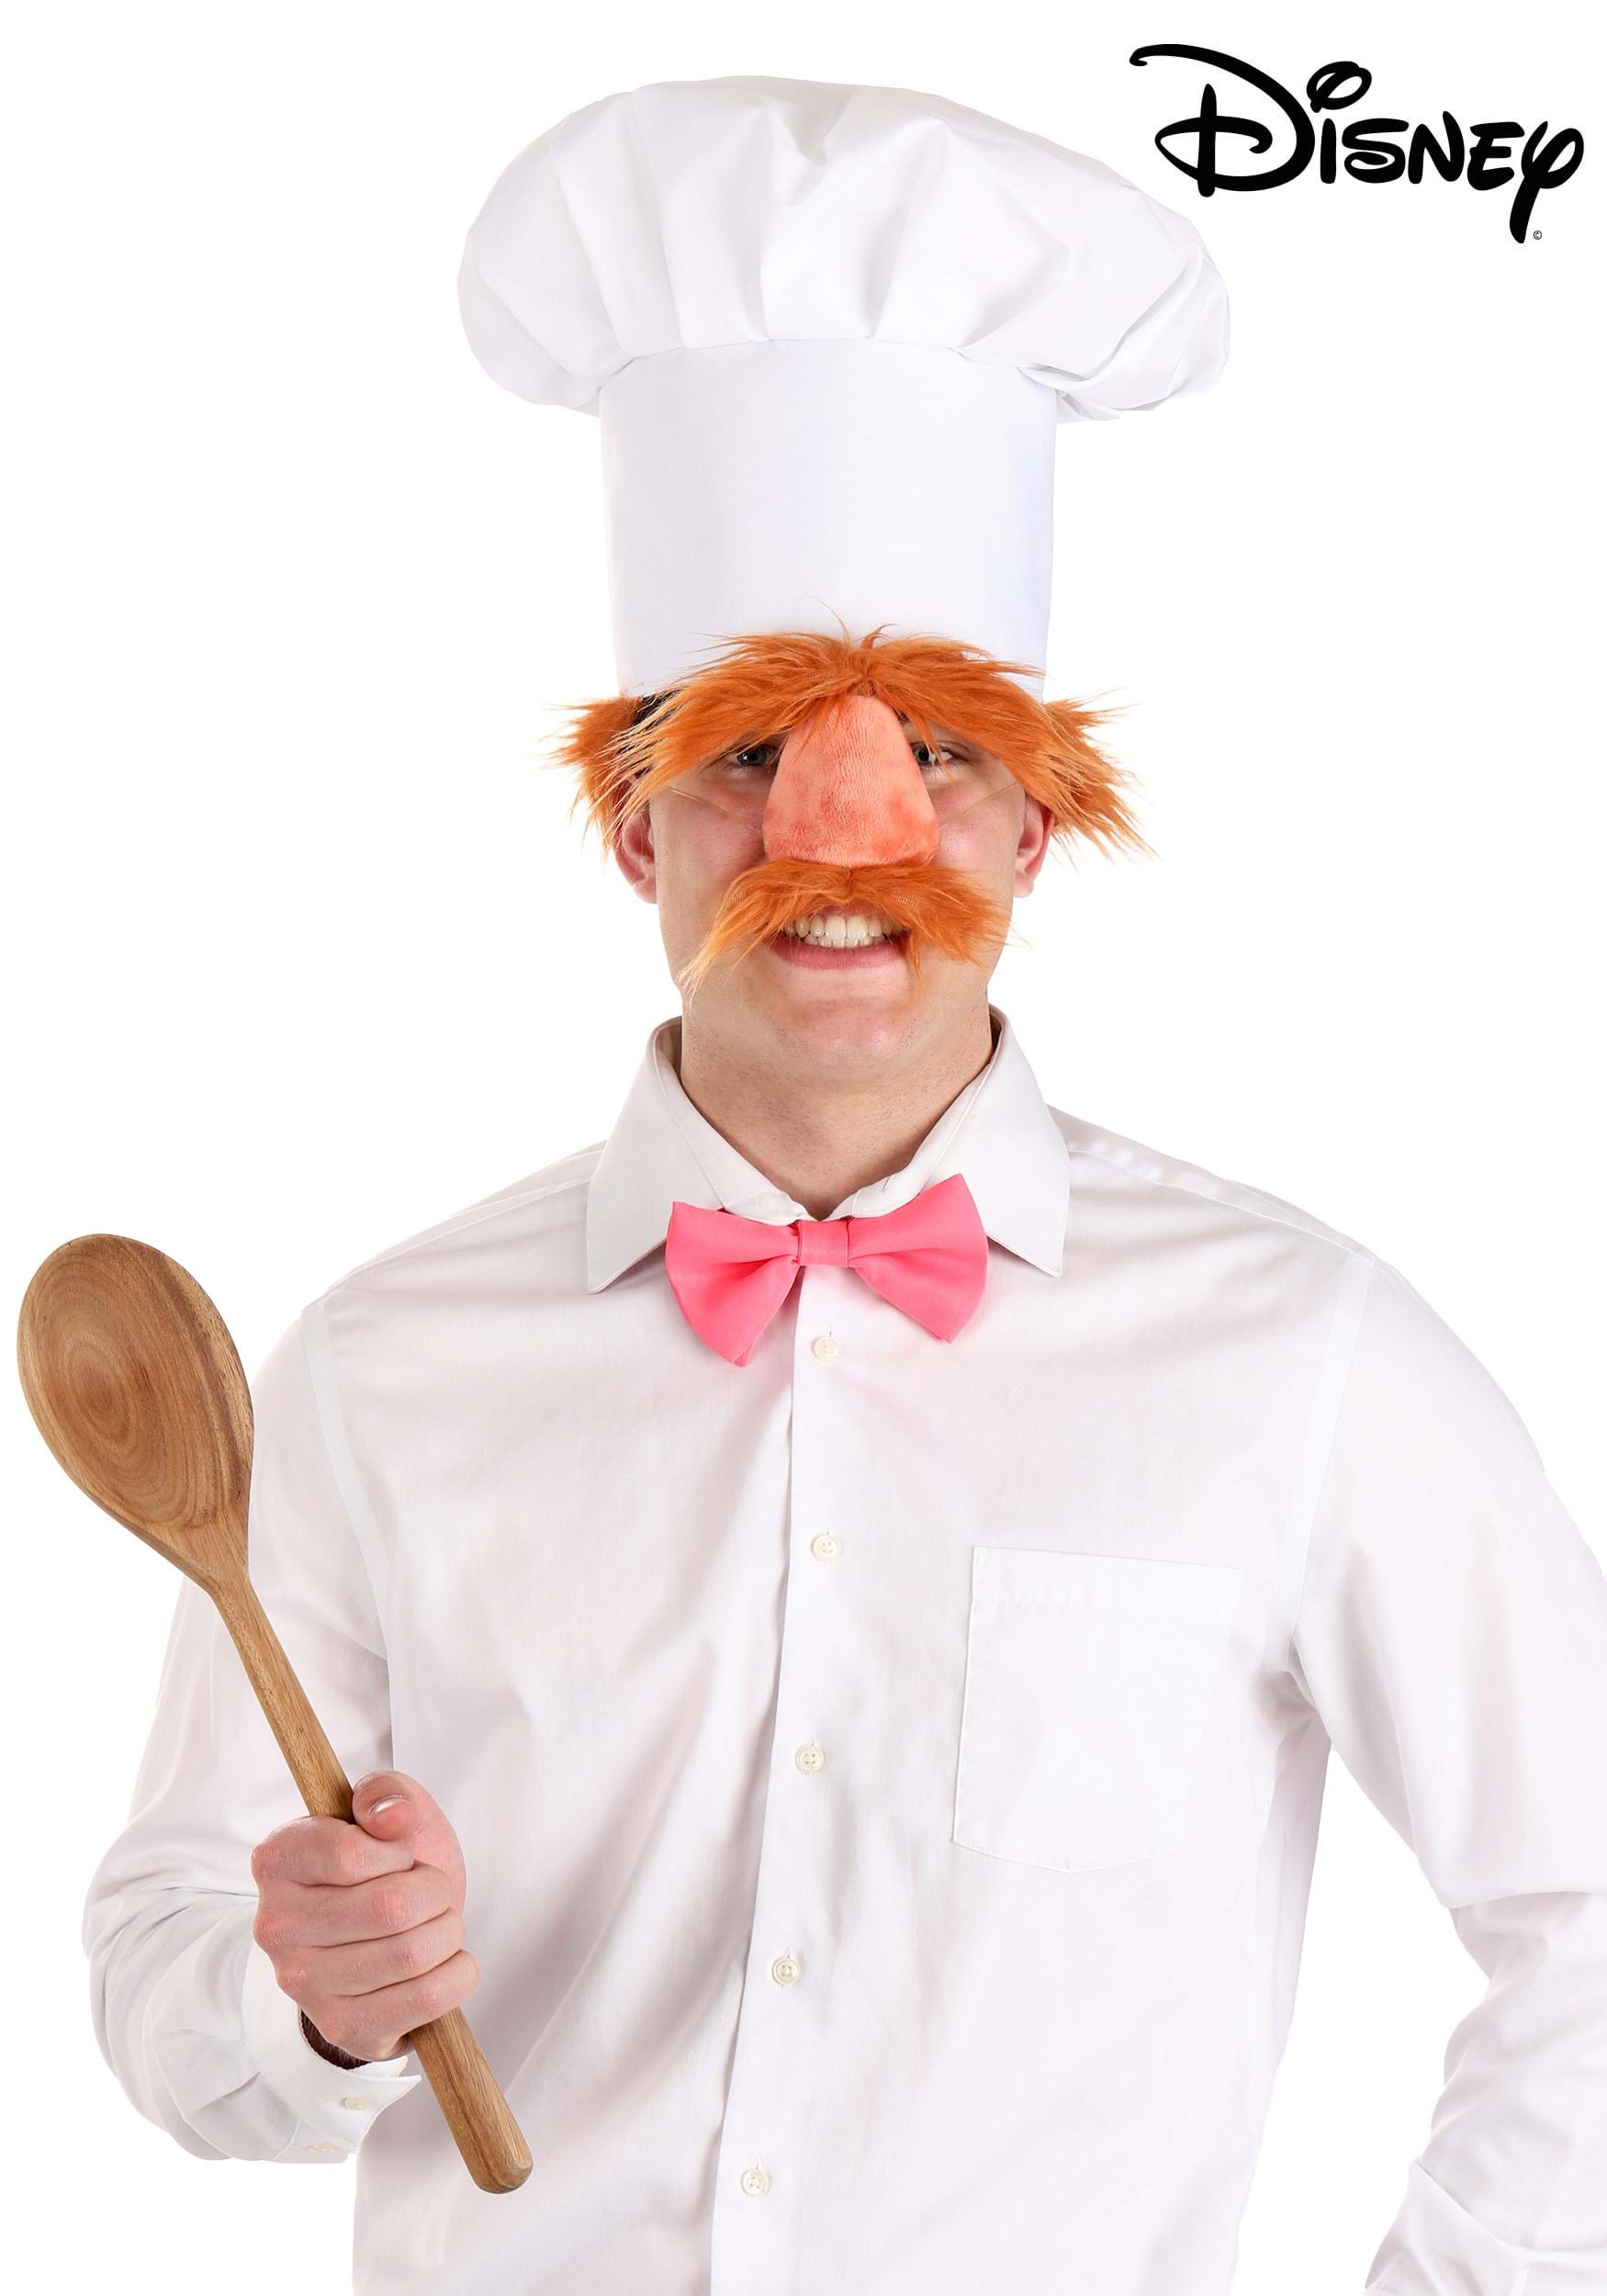 https://images.halloween.com/products/89338/1-1/swedish-chef-hat-nose-bow-kit.jpg